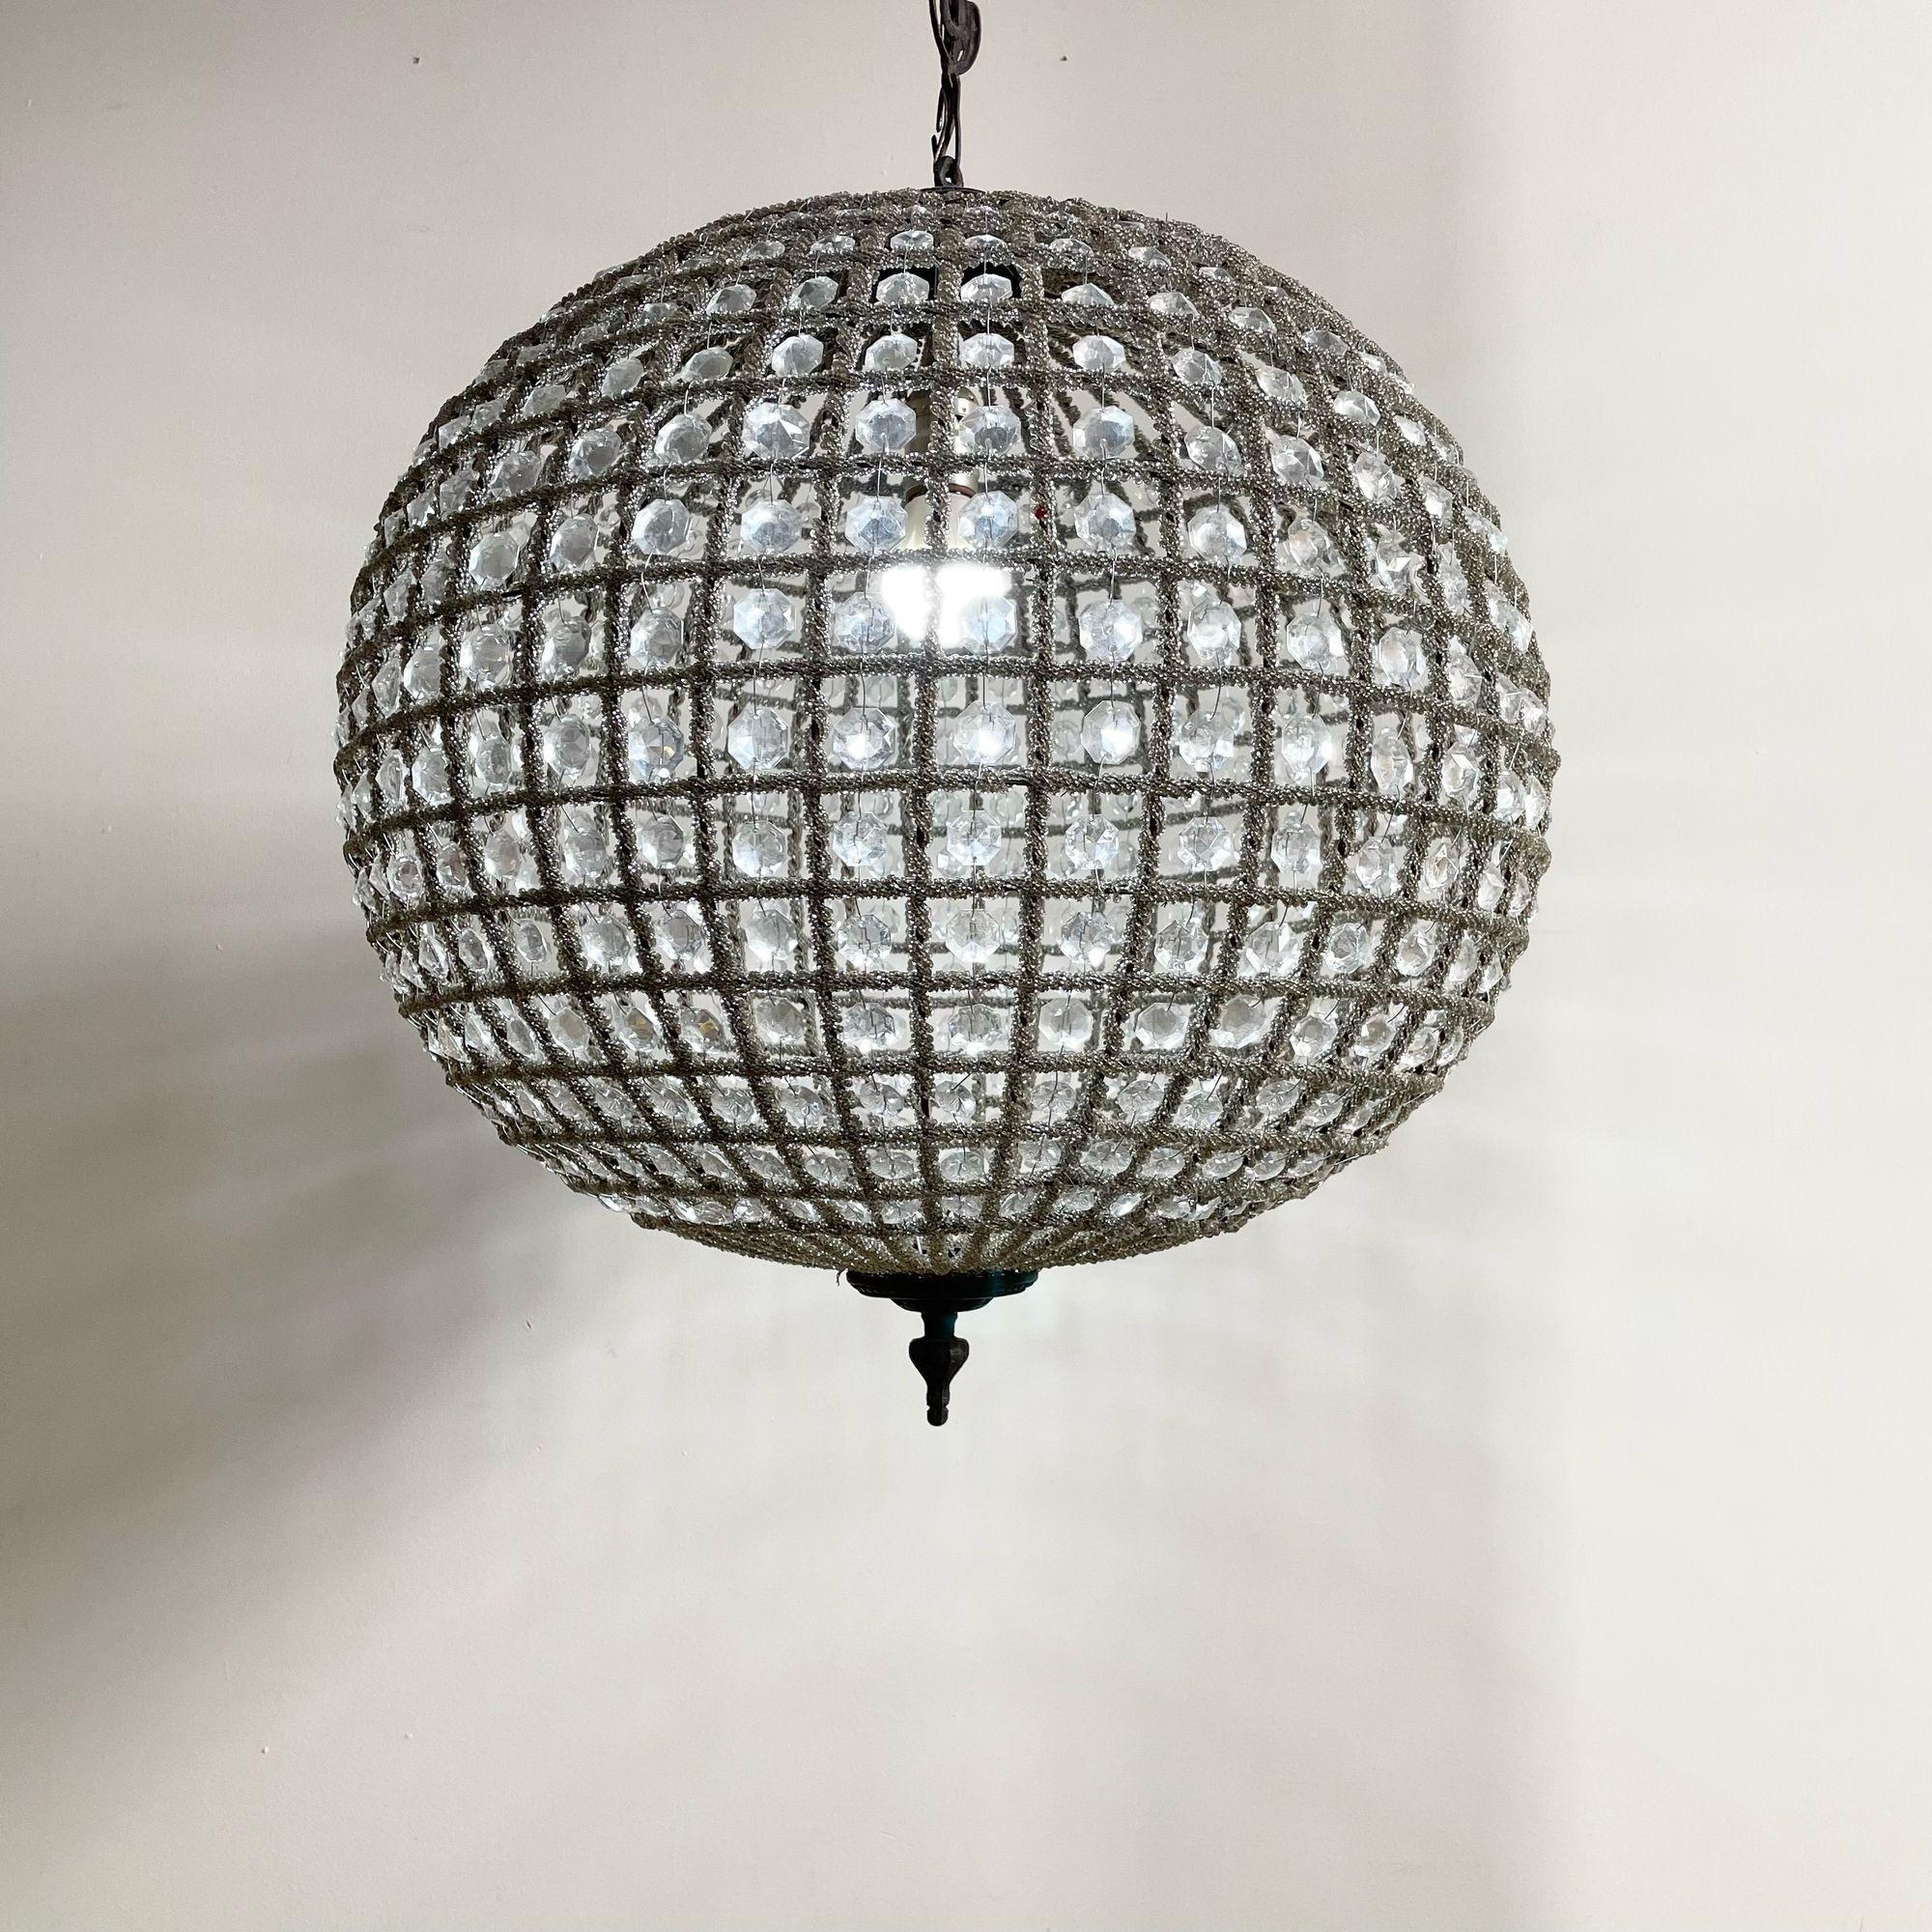 20th Century Art Deco, Round Chandeliers, Beveled Crystal, Metal, United States, 1980s For Sale